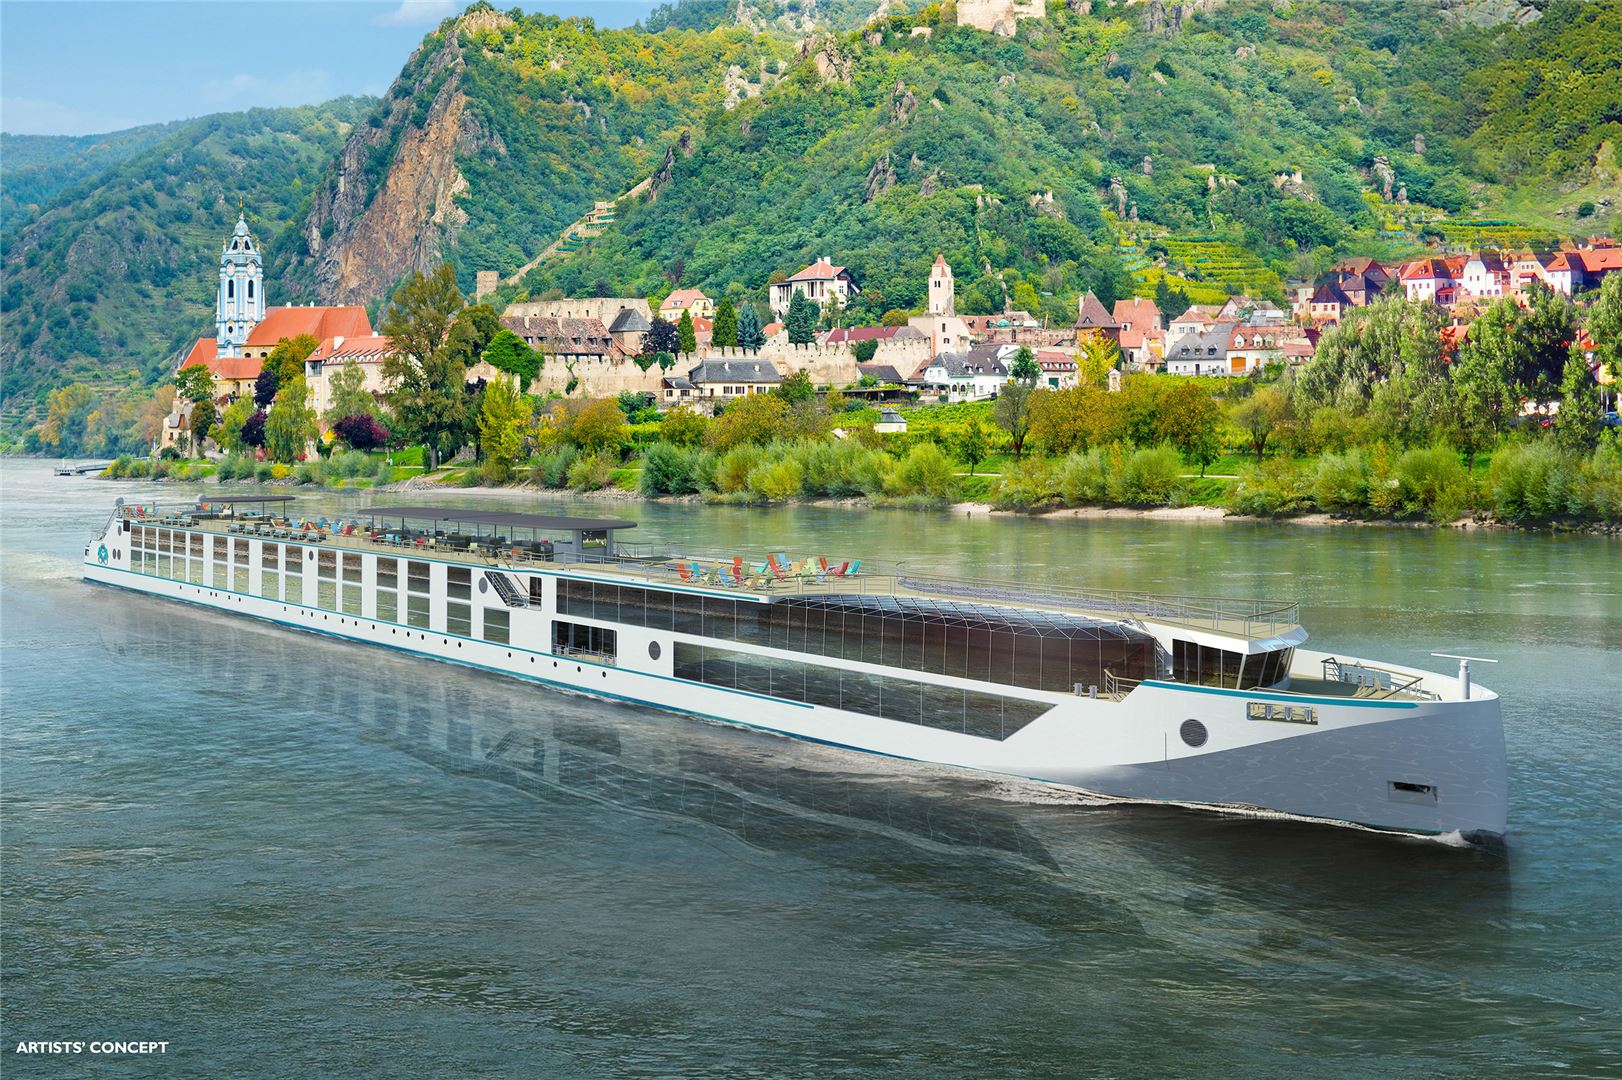 Crystal Cruises Adds Shorter Sailings To Mahler’s Spring Schedule